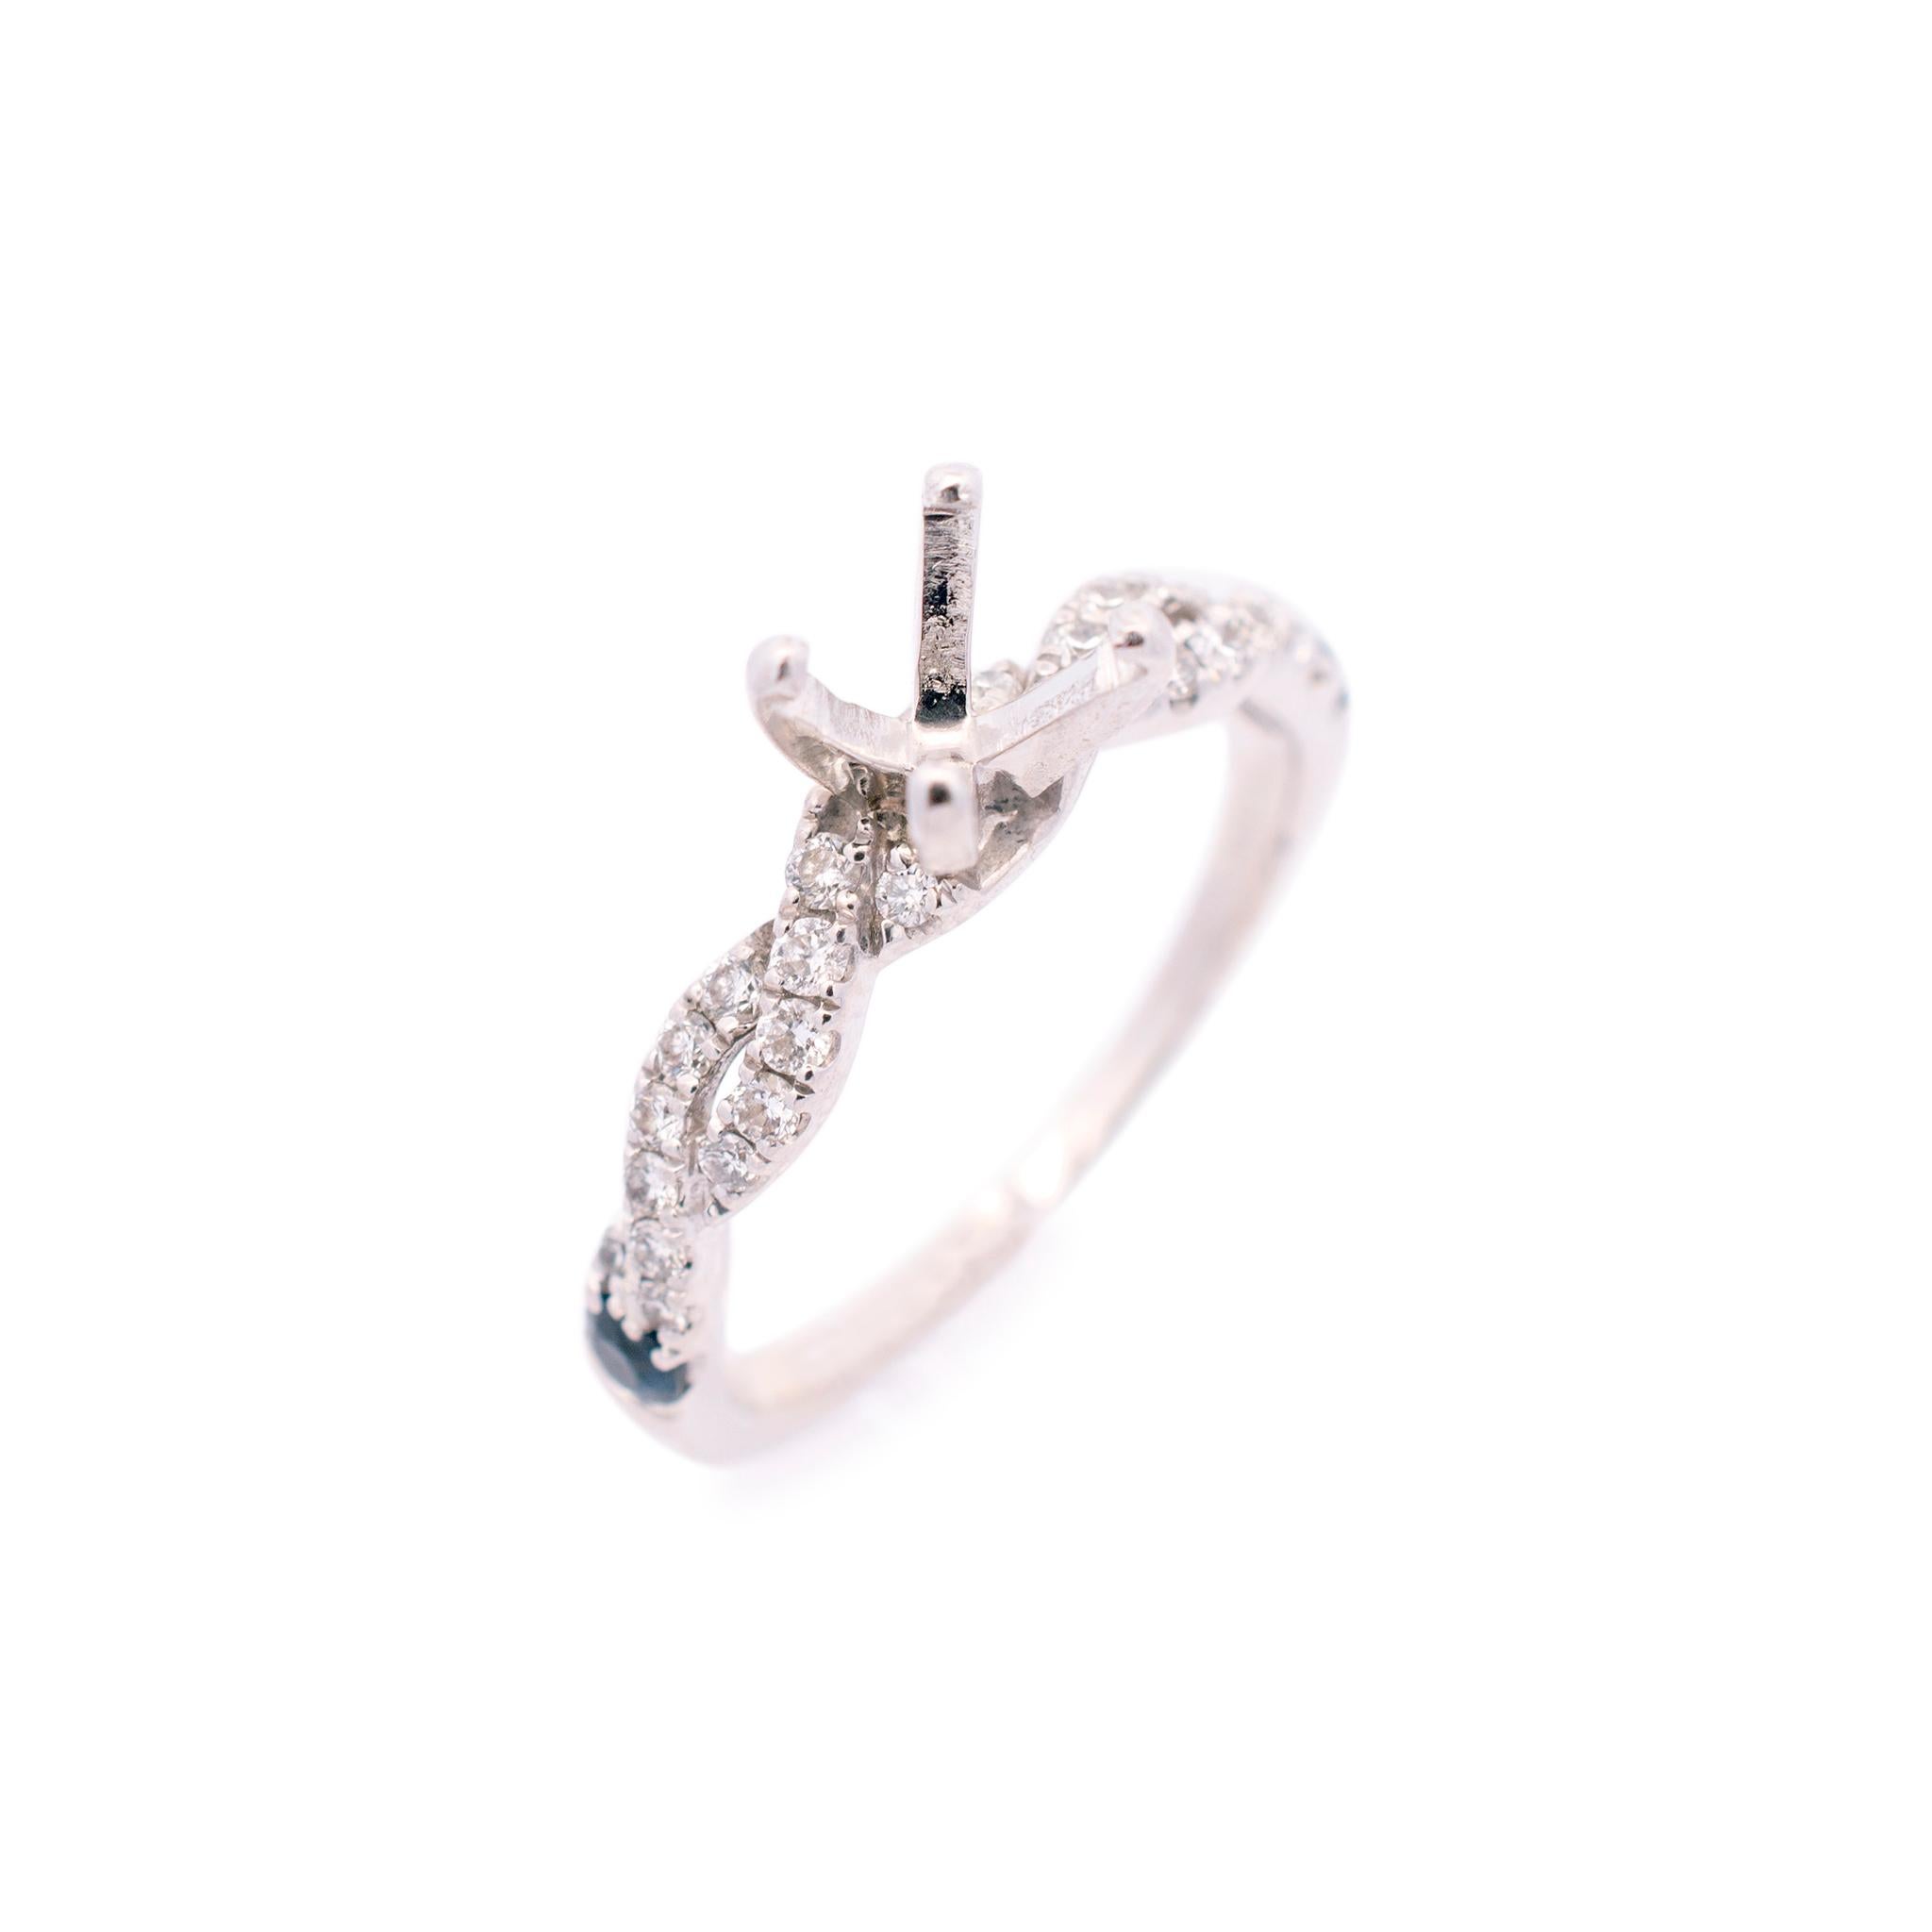 Brand: Vera Wang

Gender: Ladies

Metal Type: 14K White Gold

Size: 8

Shank Width: 2.80mm

The semi mount can accommodate a round or cushion shaped stone with a diameter between 5.90mm to 6.50mm.

Weight: 3.82 grams

Ladies 14K white gold diamond